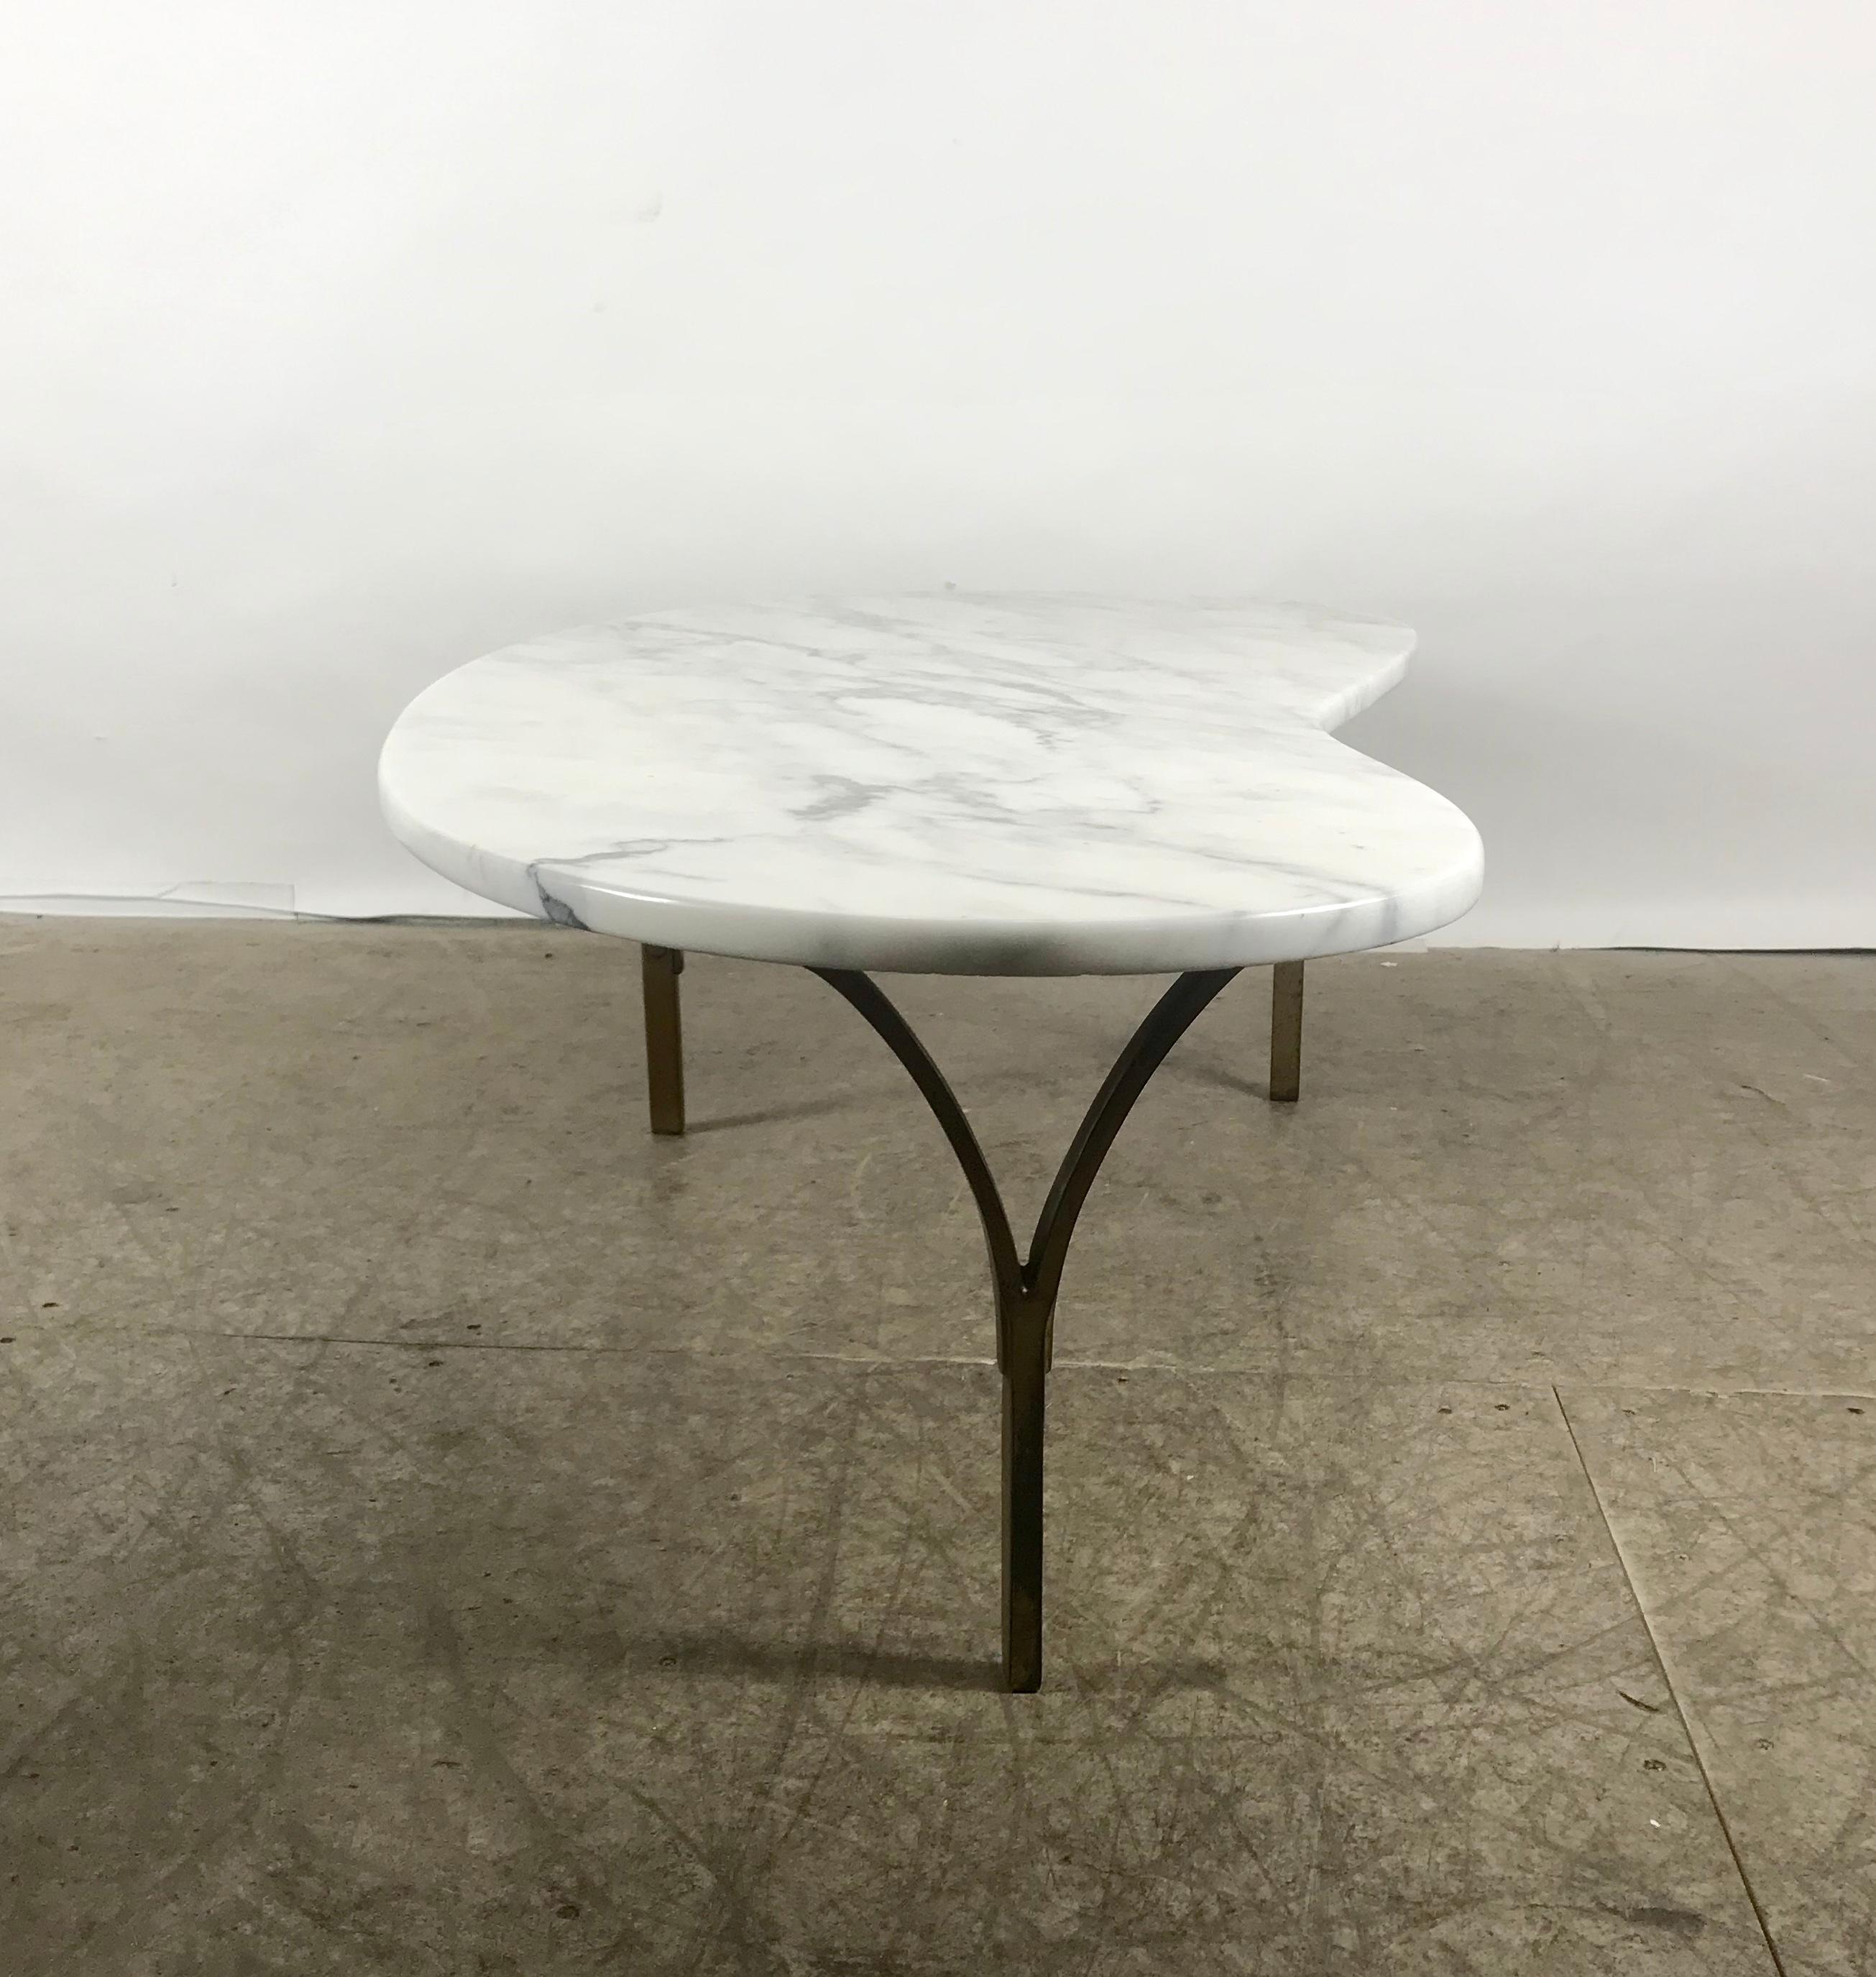 Polished Stunning Kidney Shape Italian Marble and Brass Coffee or Cocktail Table